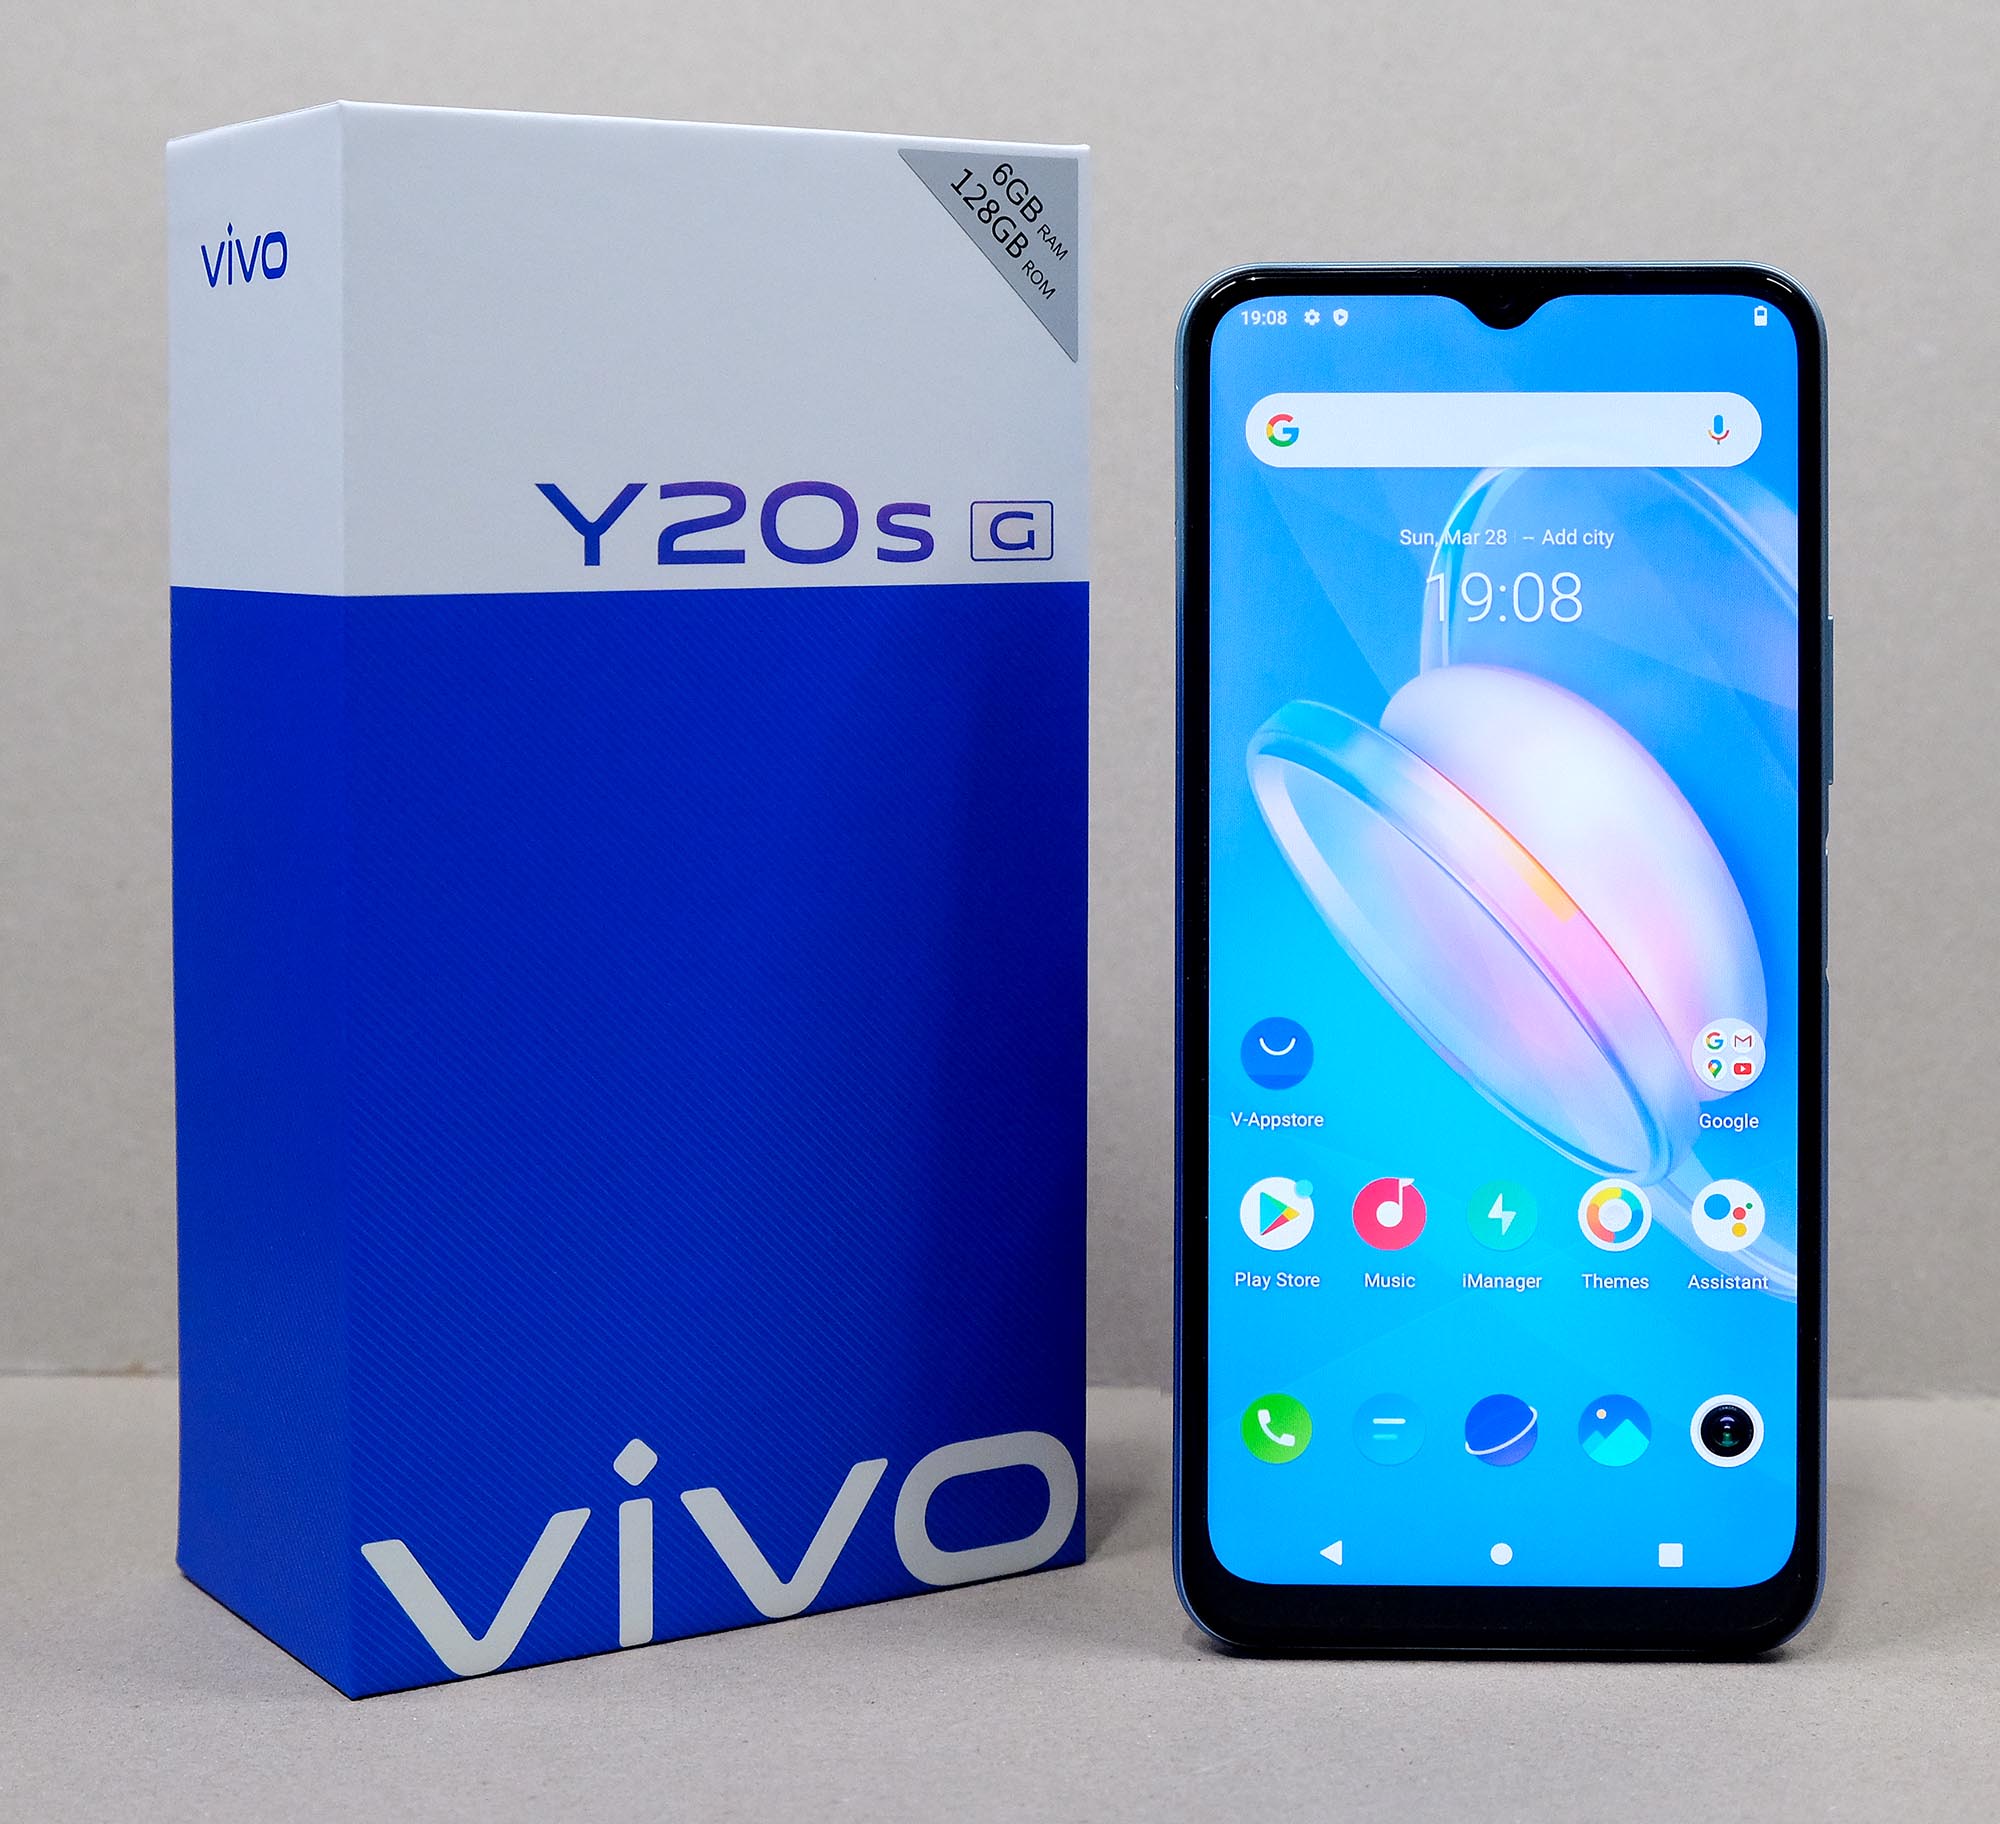 First Look: vivo Y20S [G] – Unboxing and Initial Impressions